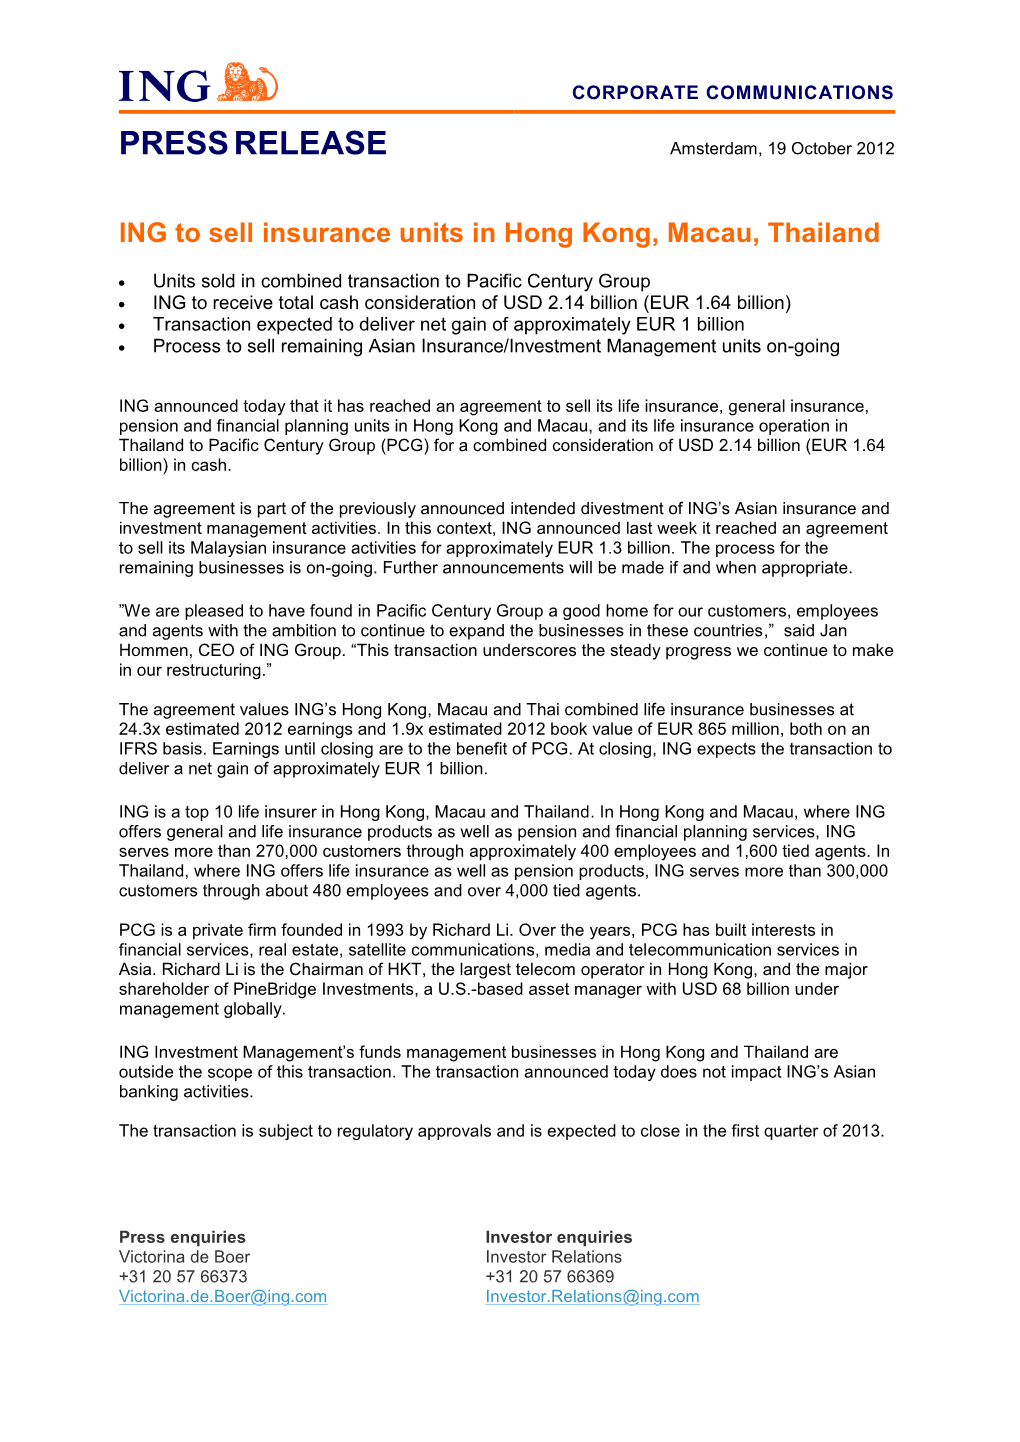 ING to Sell Insurance Units in Hong Kong, Thailand